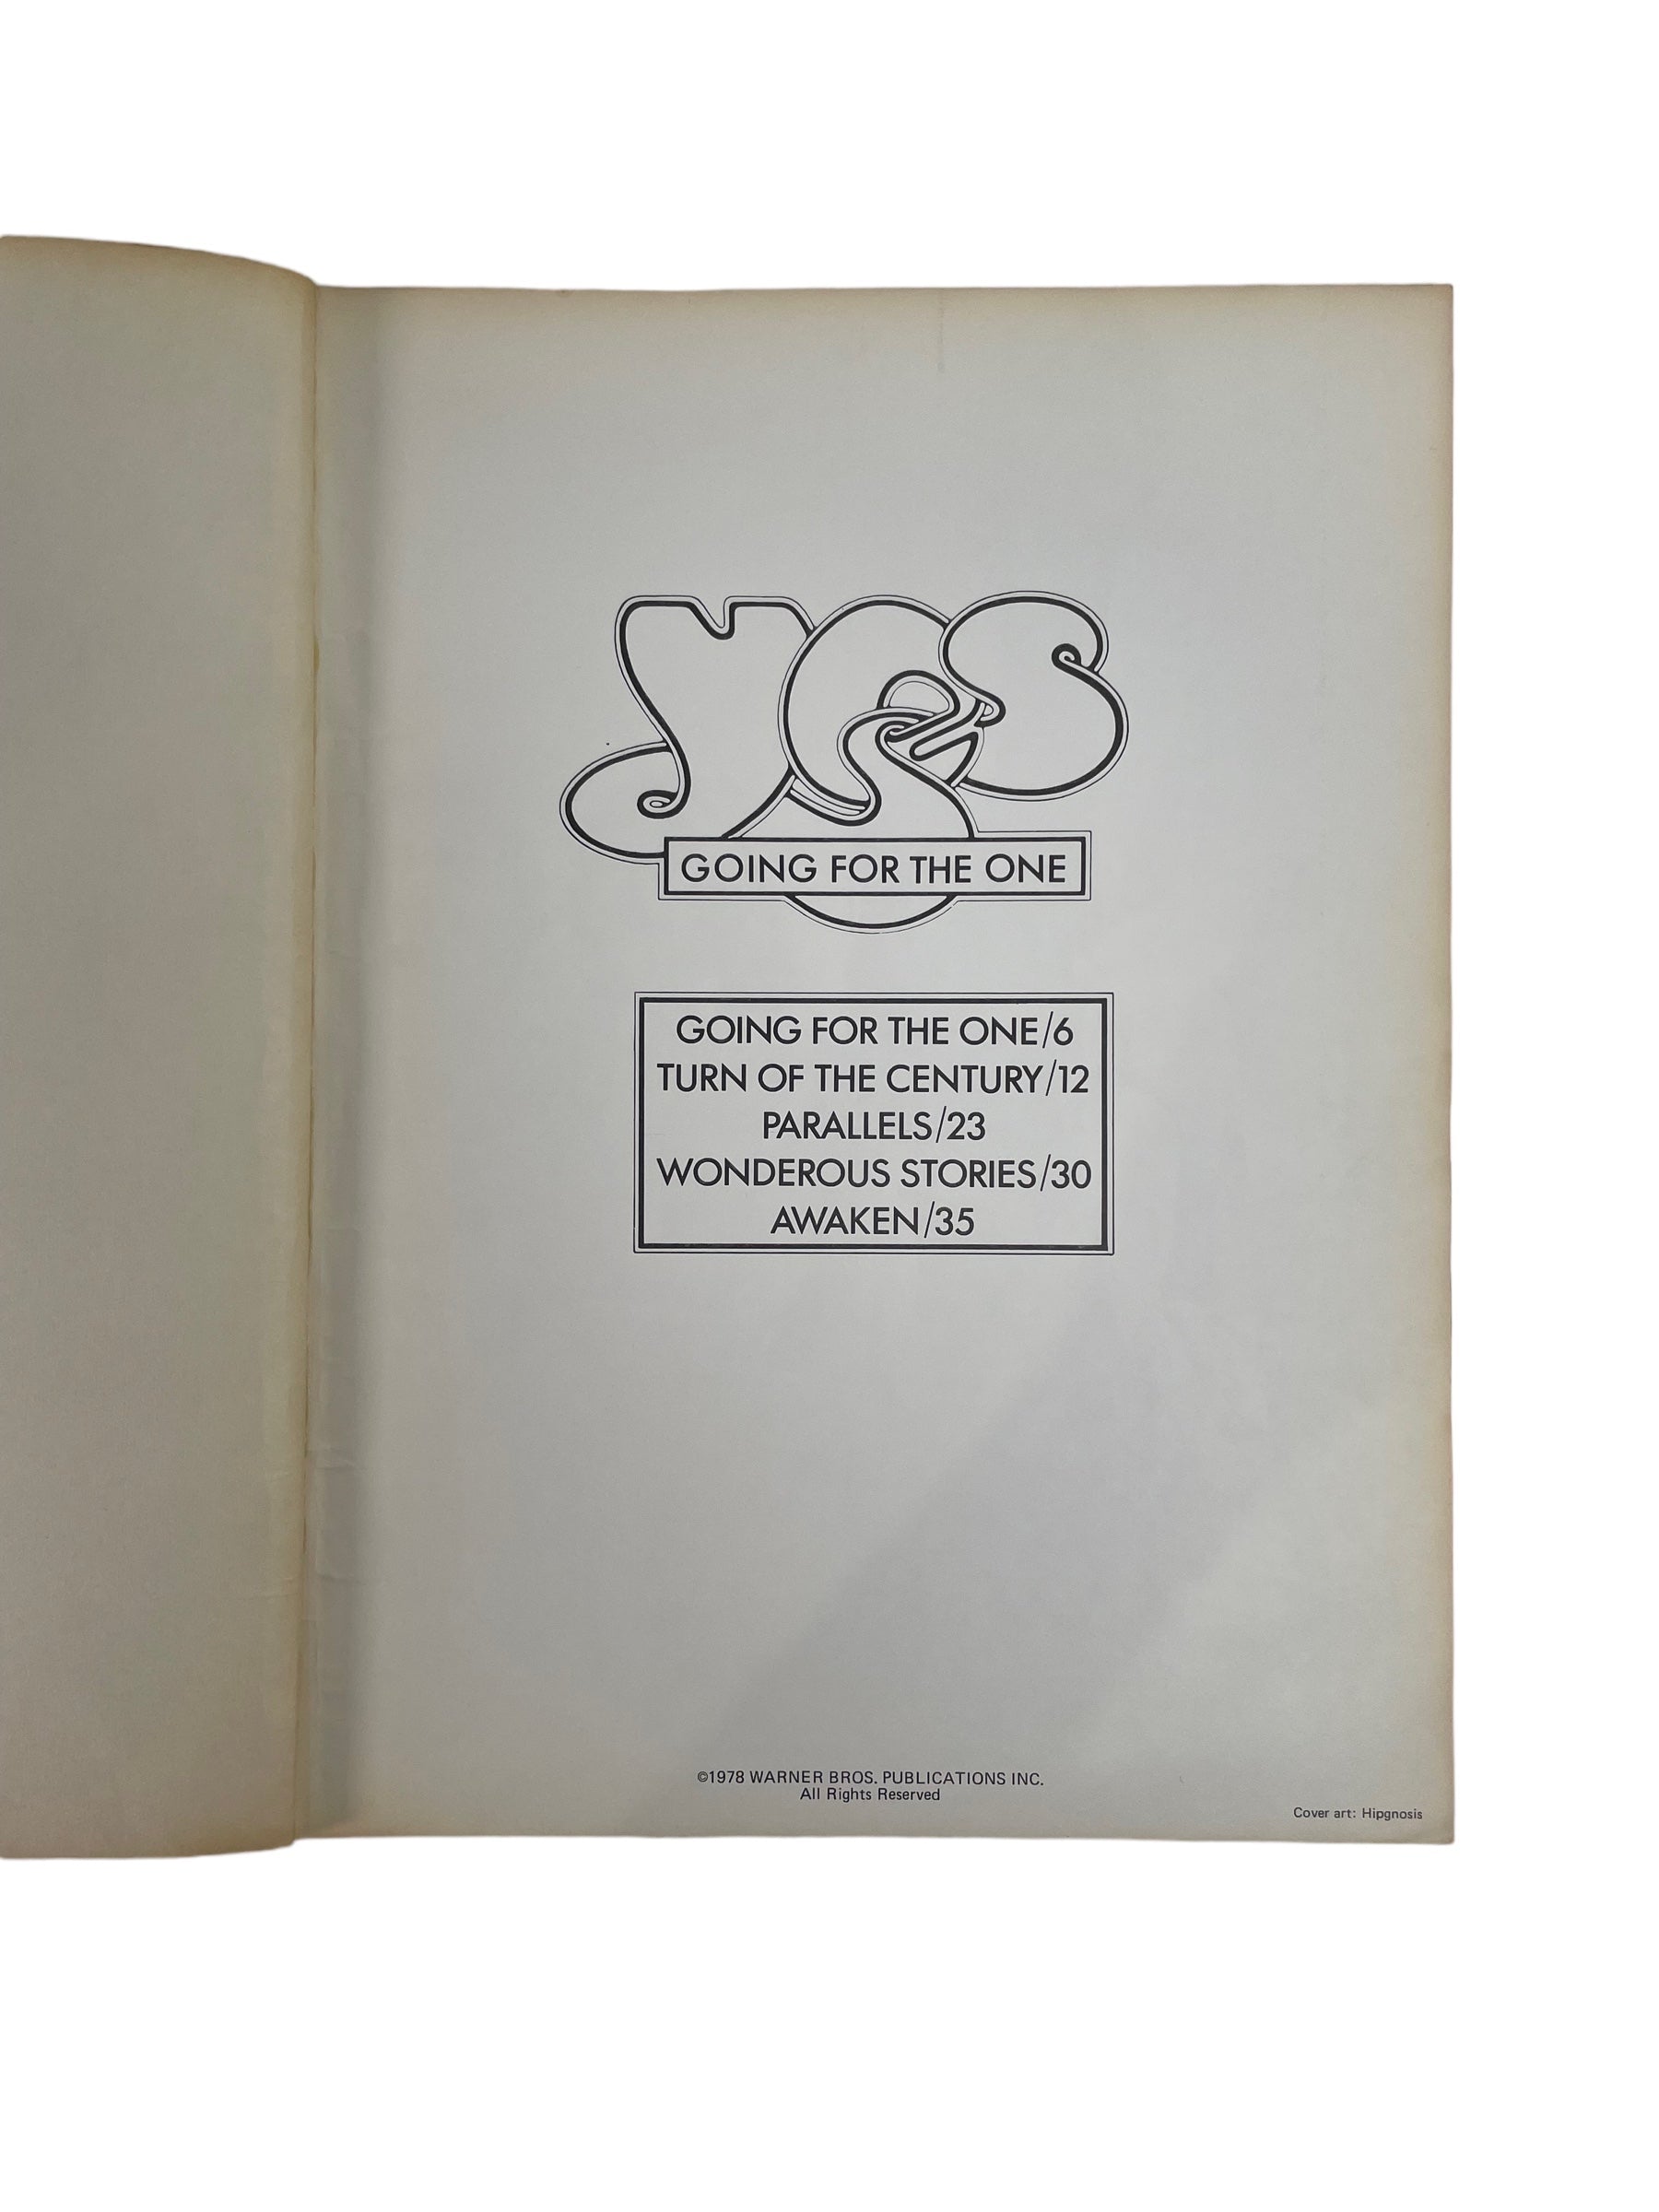 Deux recueils de partitions Yes comprenant "Yes- Going For the One" (1978) et "Yes Tormato" (1979)